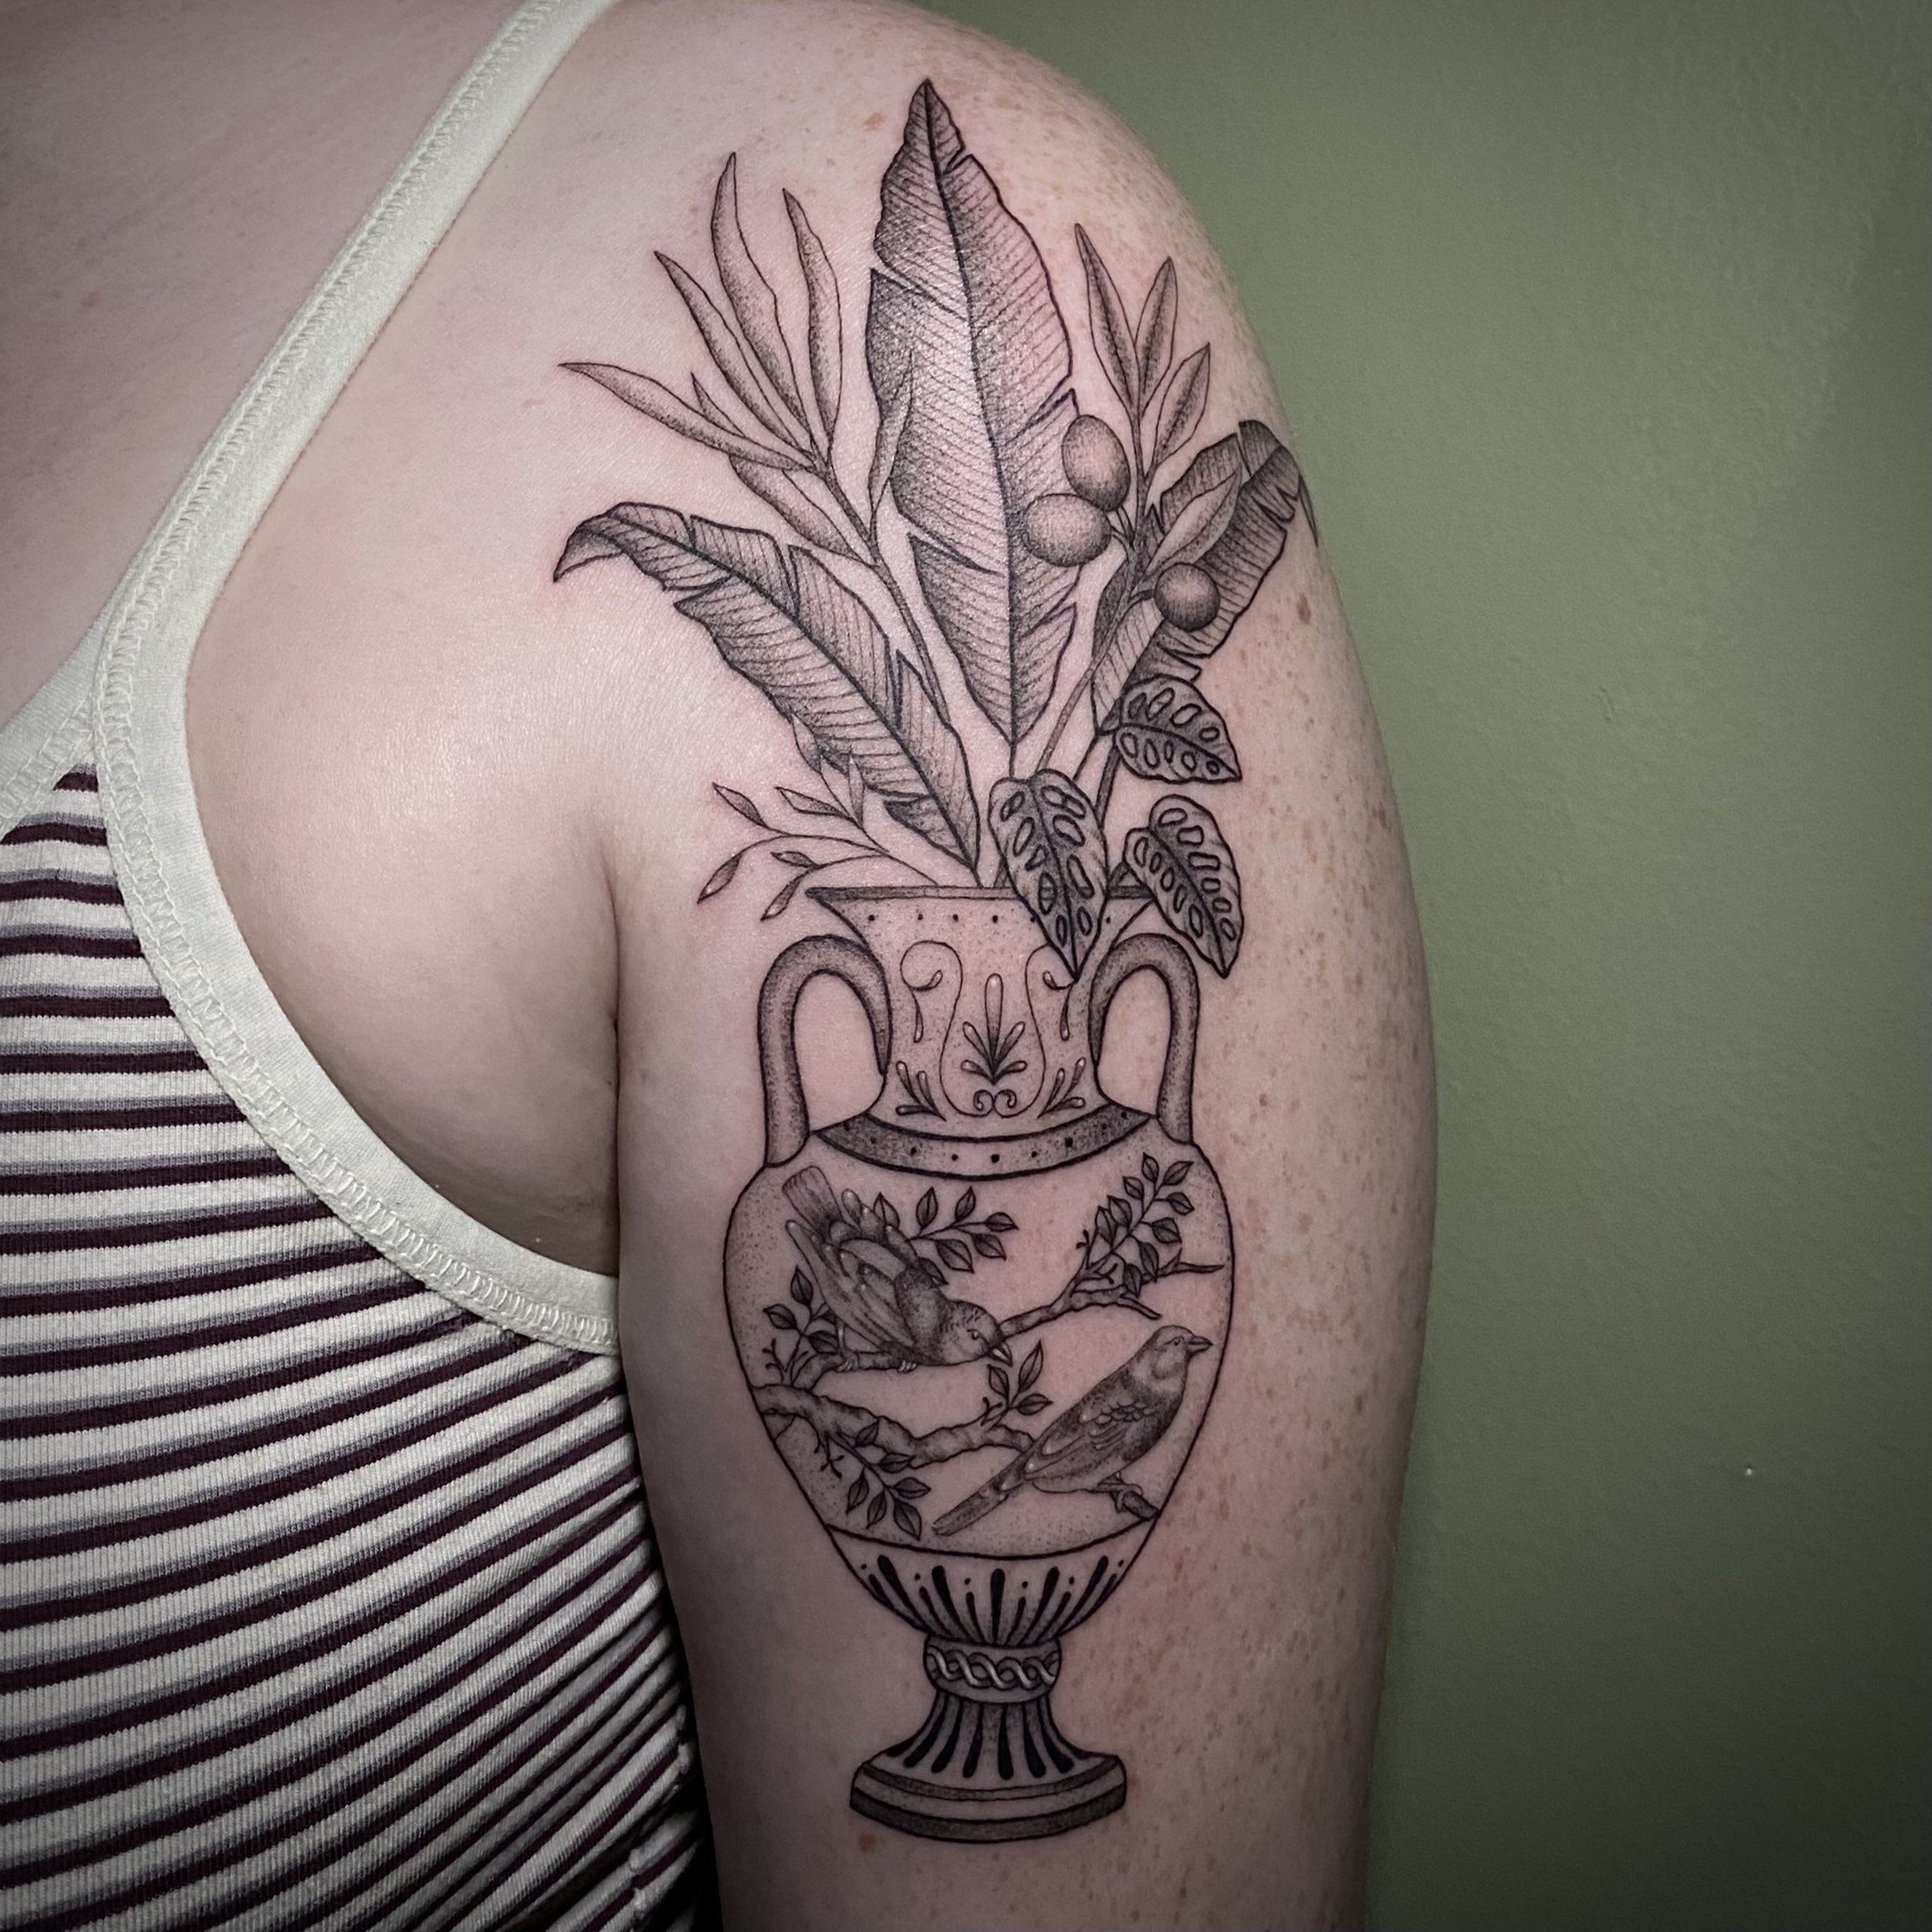 Fine line black and grey tattoo of a classical greek amphora filled with folliage tattooed by Sarah Cherney of Sacred Mandala Studio.